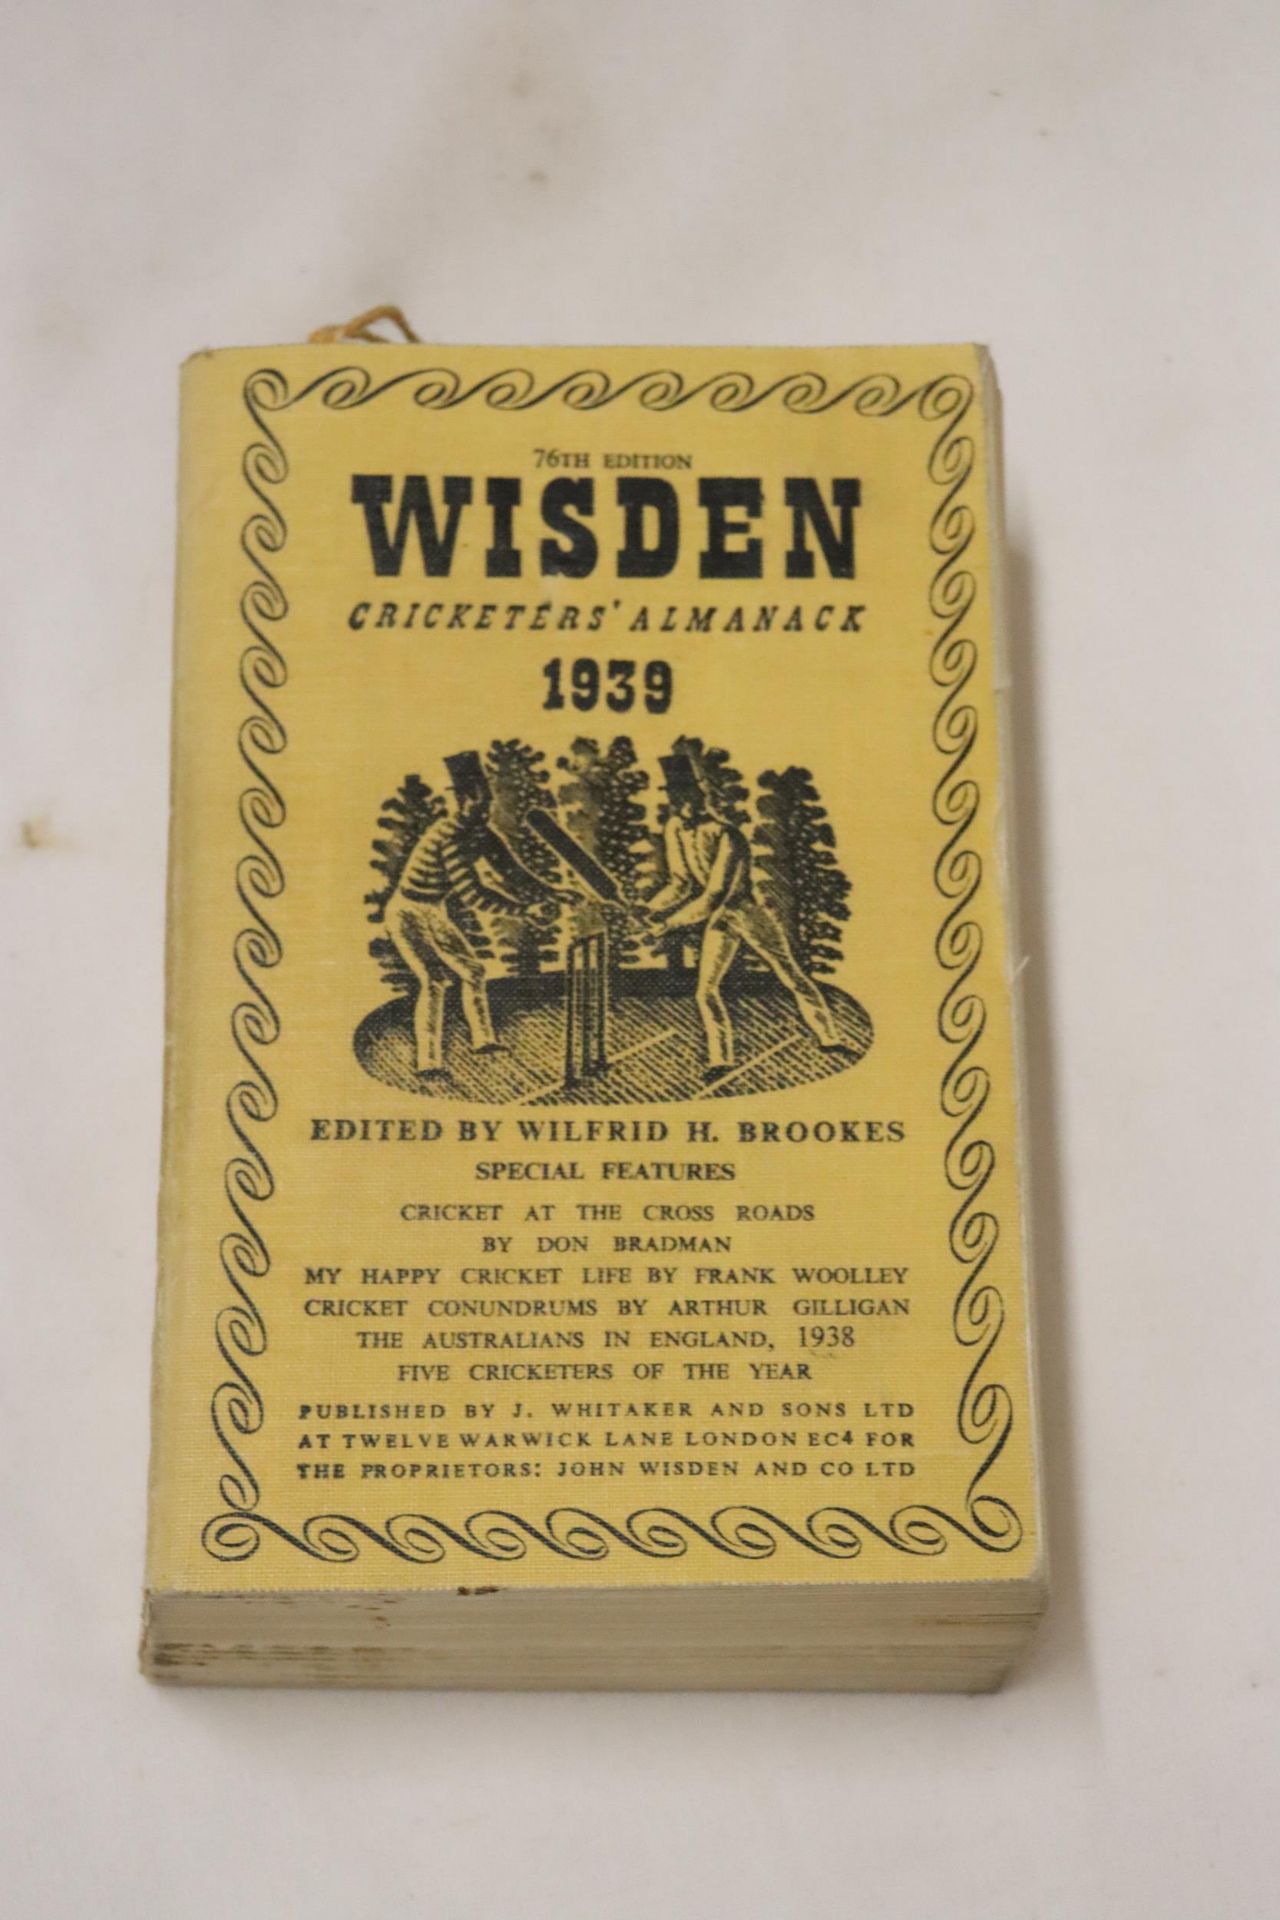 A 1939 COPY OF WISDEN'S CRICKETER'S ALMANACK. THIS COPY IS IN USED CONDITION, THE SPINE IS INTACT.